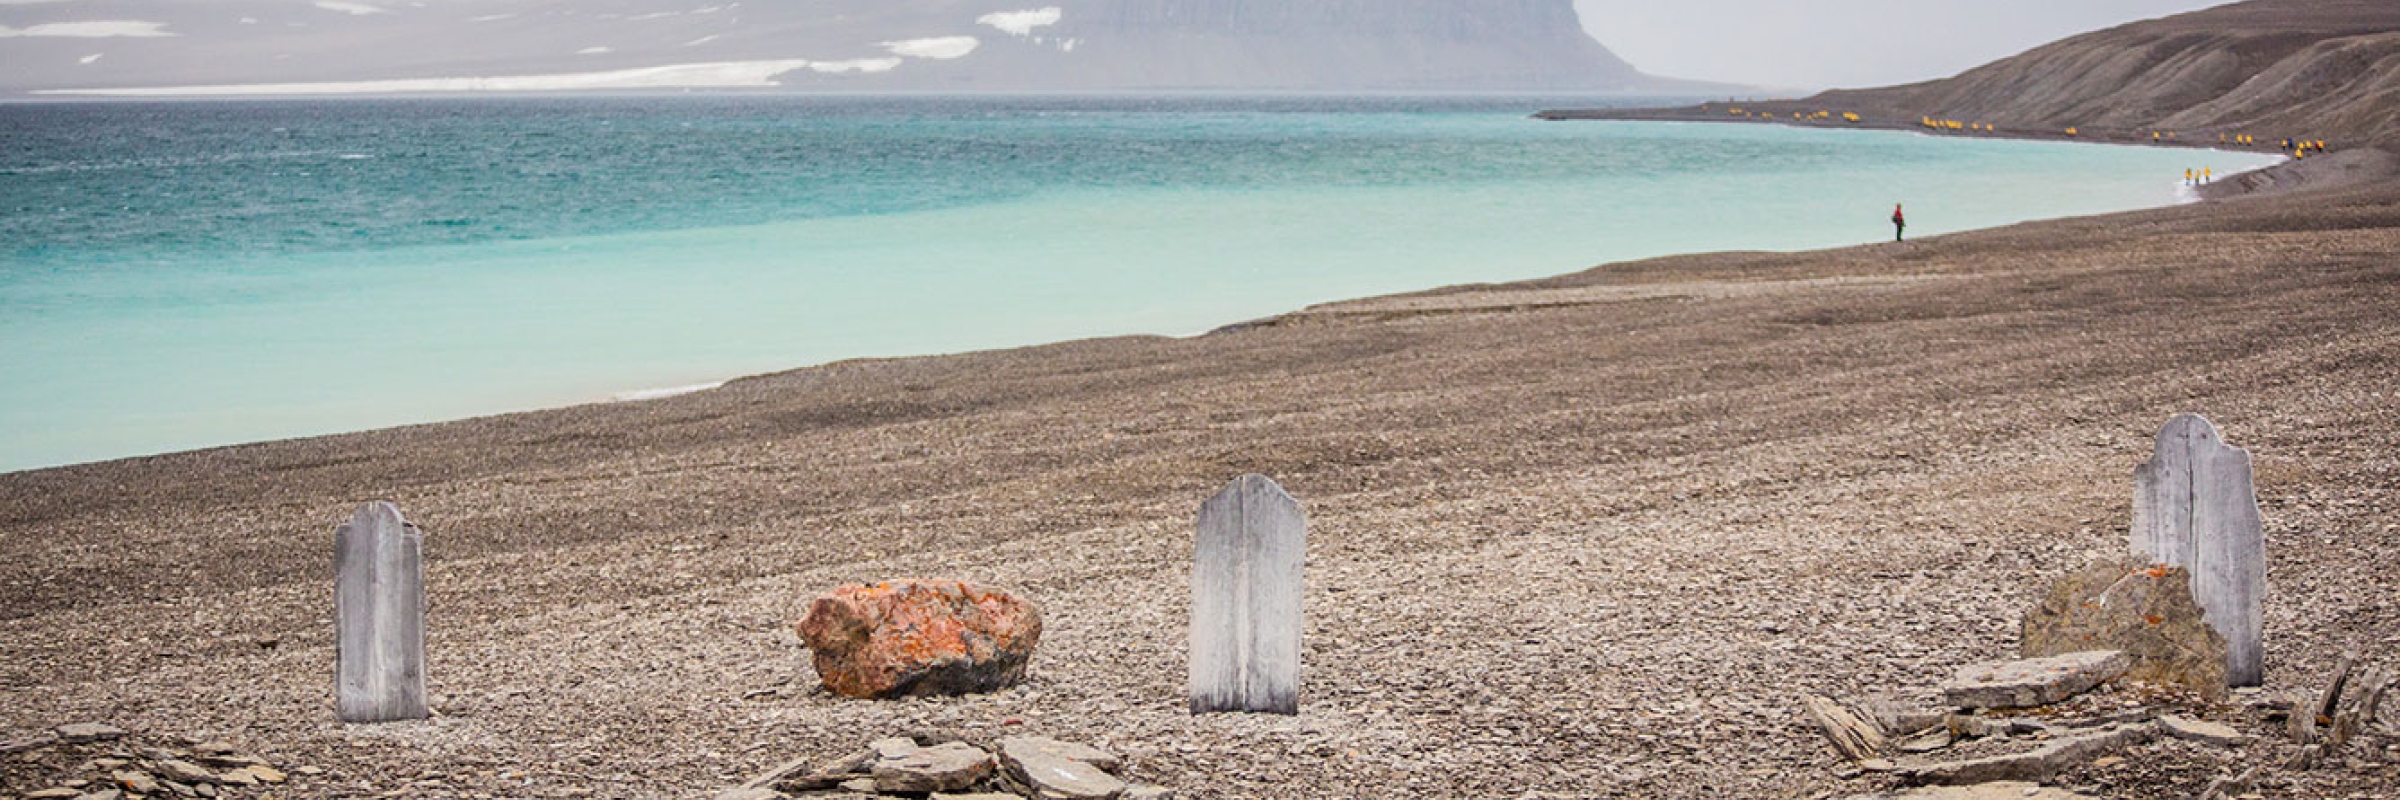 Three graves of Franklin expedition members on Beechey Island, Nunavut in the Canadian High Arctic - Photo by Acacia Johnson